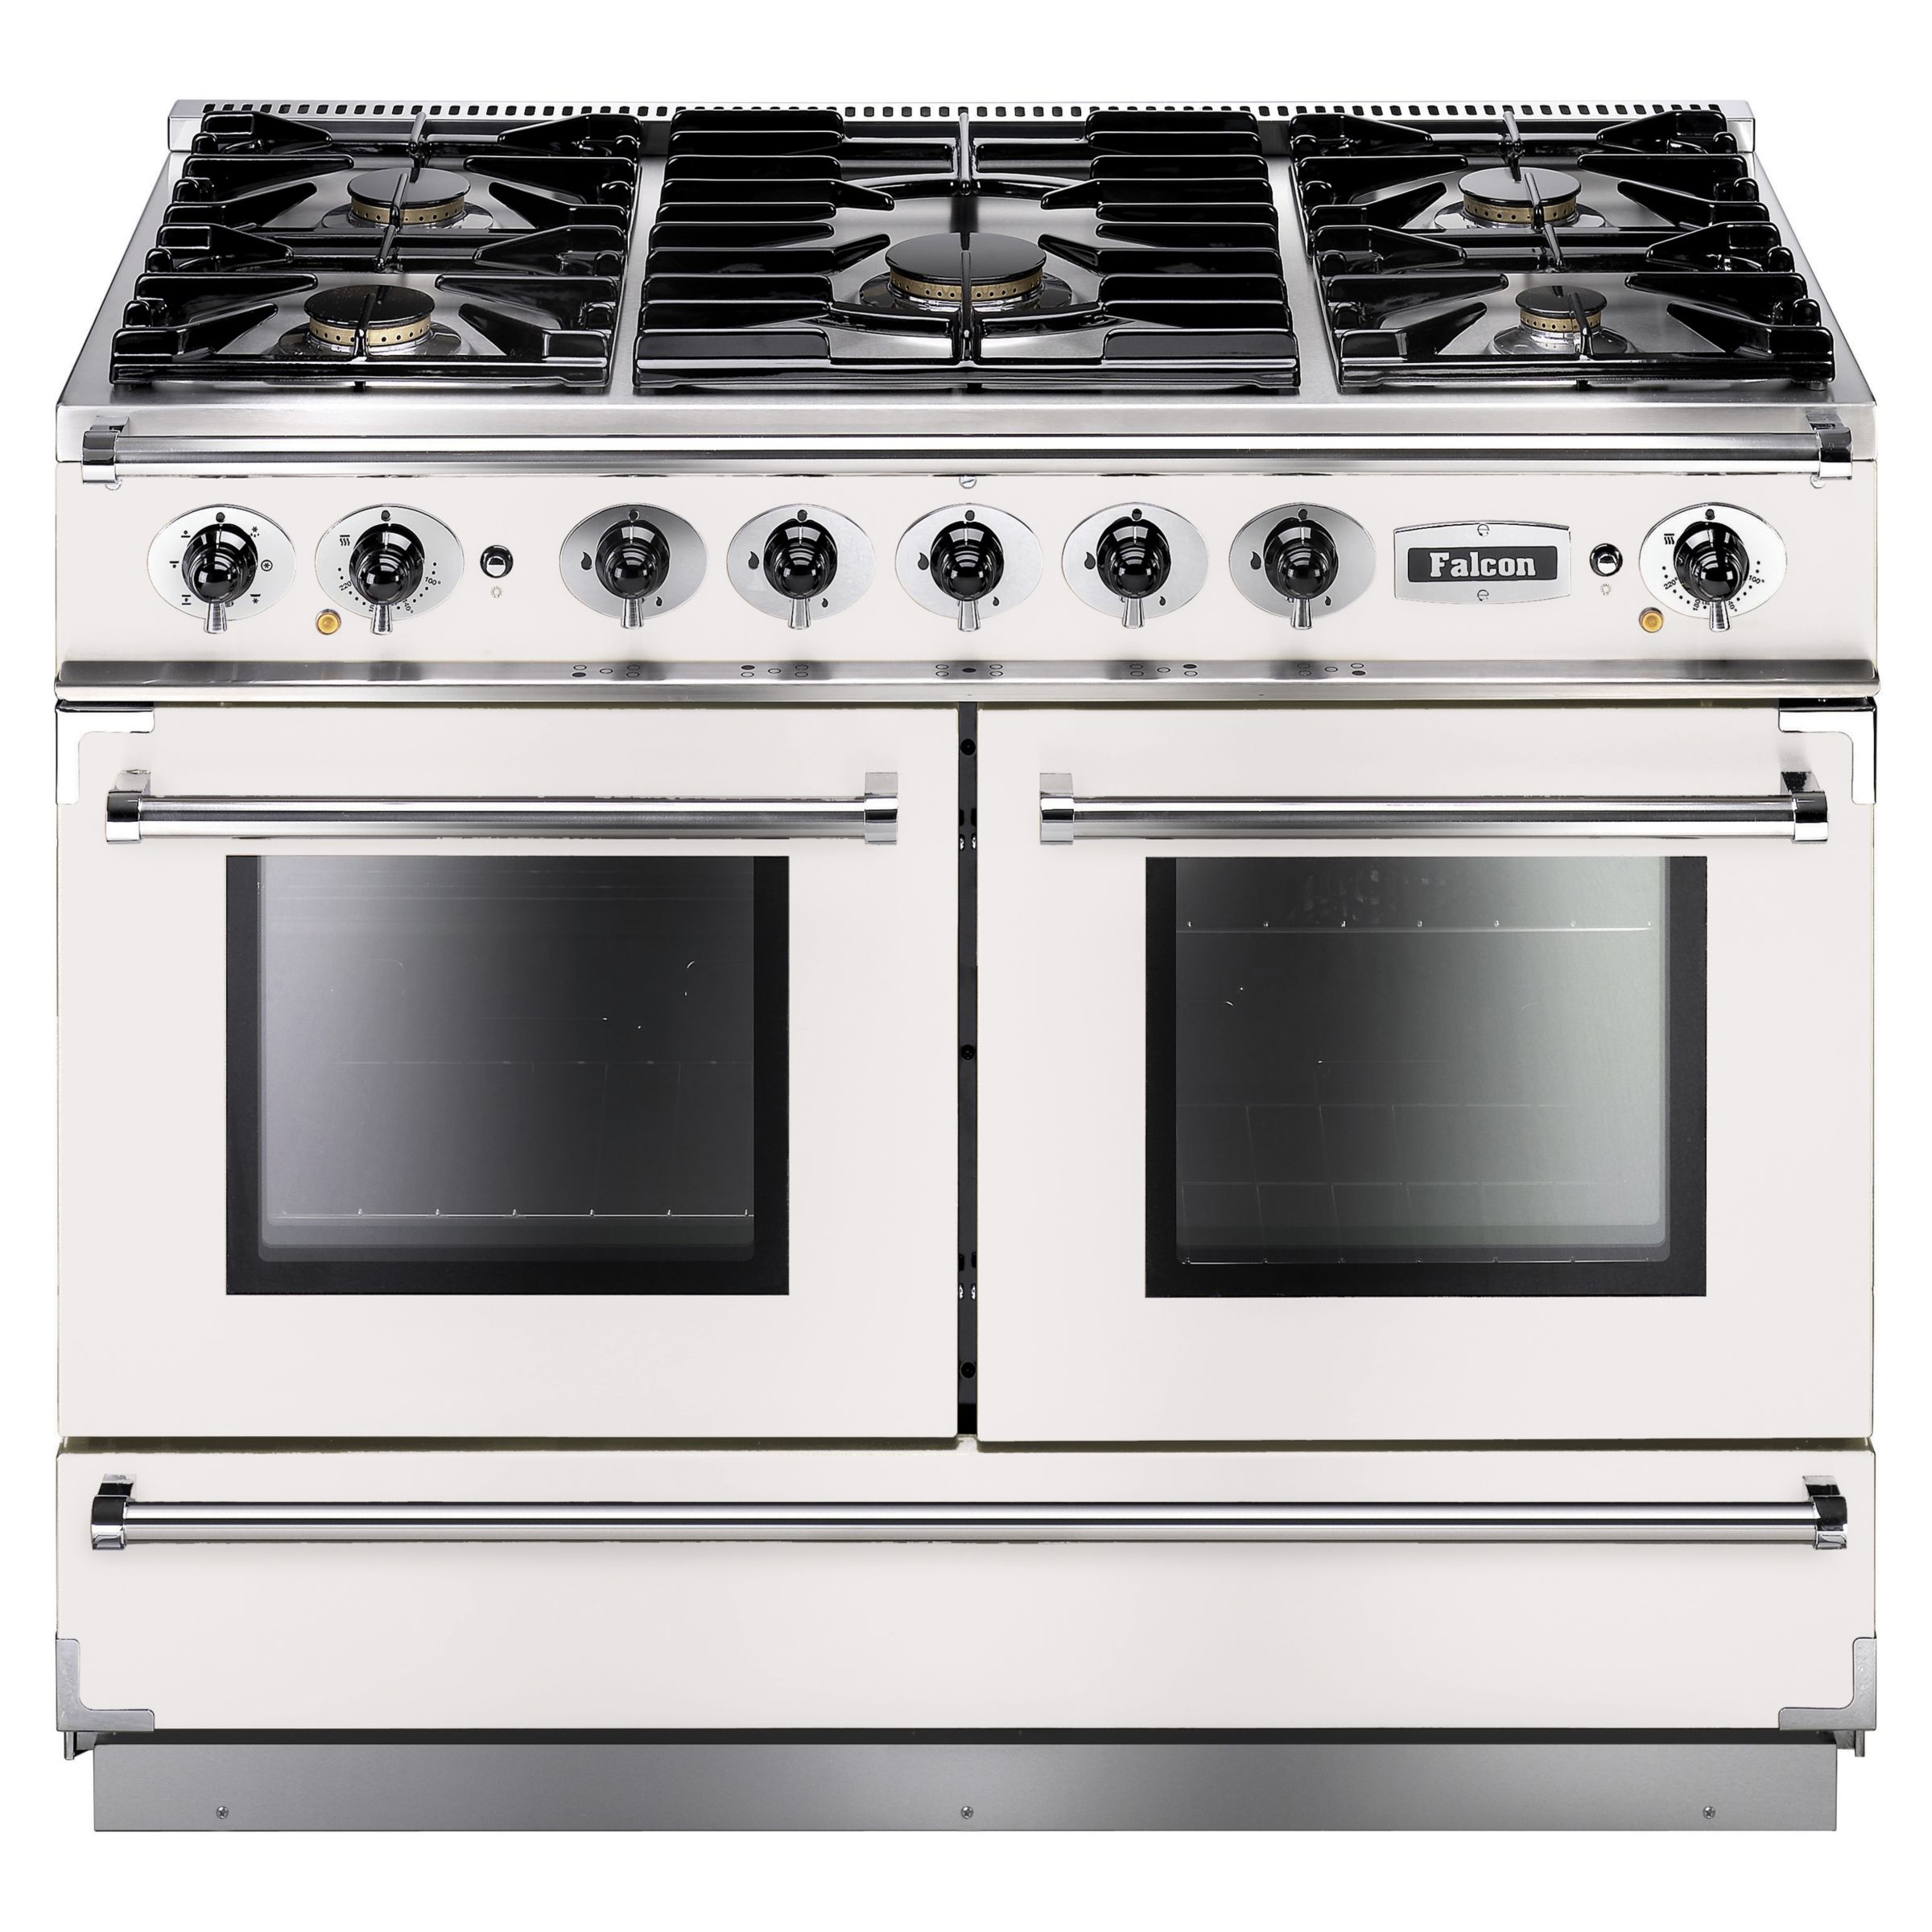 Falcon Continental 1092 DFWH/NM Dual Fuel Range Cooker, White at John Lewis